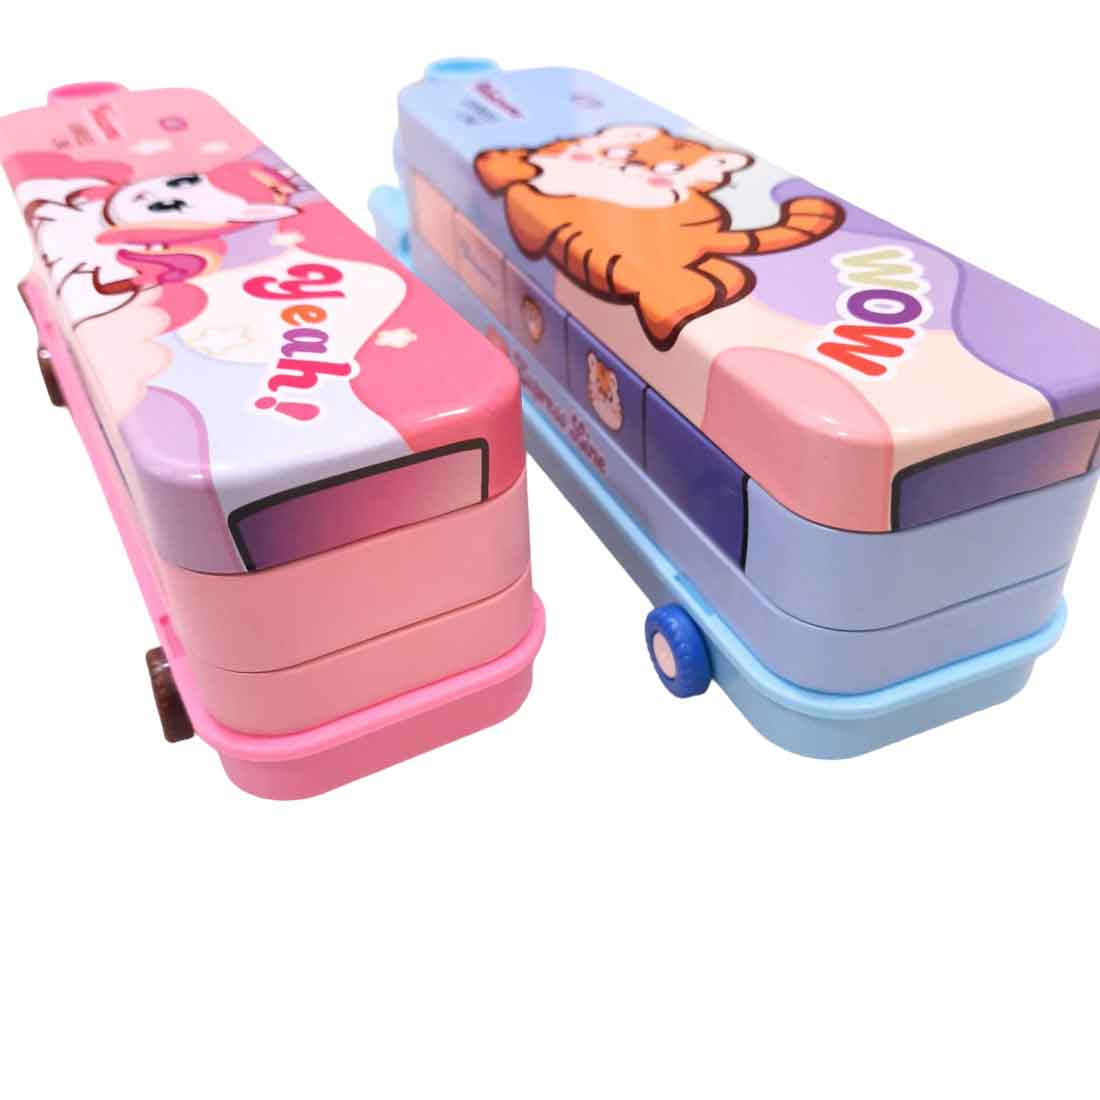 Colorful & Attractive in Train Design Pencil Box | Pen pencil case - for Kids School Supplies & Birthday Return Gifts | in Assorted Colors - Apkamart